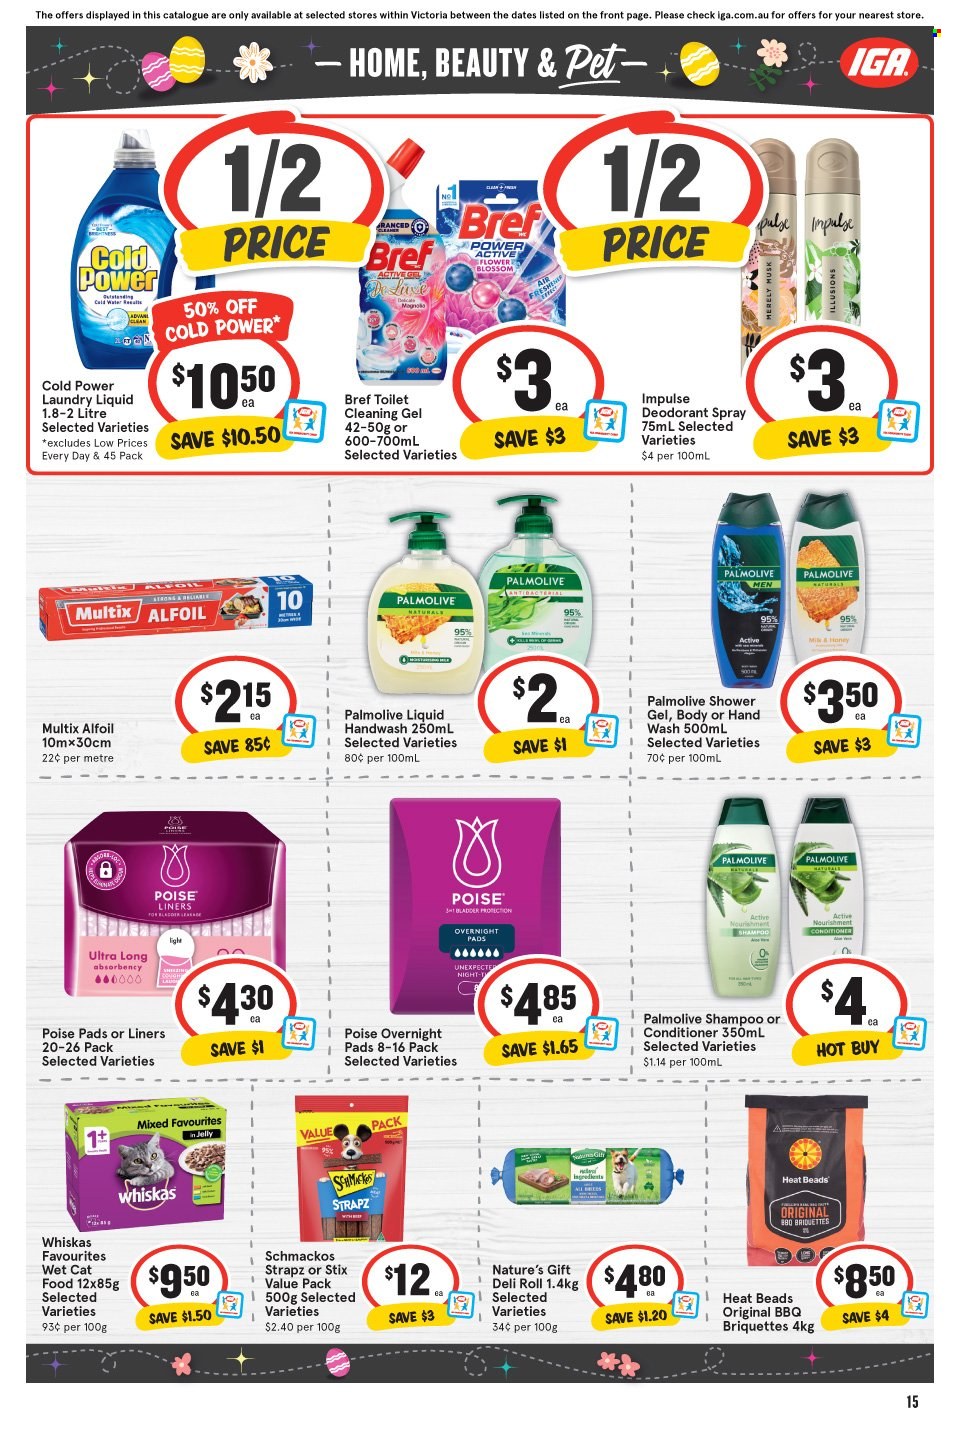 thumbnail - IGA Catalogue - 29 Mar 2023 - 4 Apr 2023 - Sales products - milk, Blossom, Victoria Sponge, honey, water, cleaner, Bref Power, laundry detergent, shampoo, shower gel, hand wash, Palmolive, sanitary pads, conditioner, anti-perspirant, deodorant, animal food, animal treats, cat food, Whiskas, Strapz, Schmackos, wet cat food. Page 16.